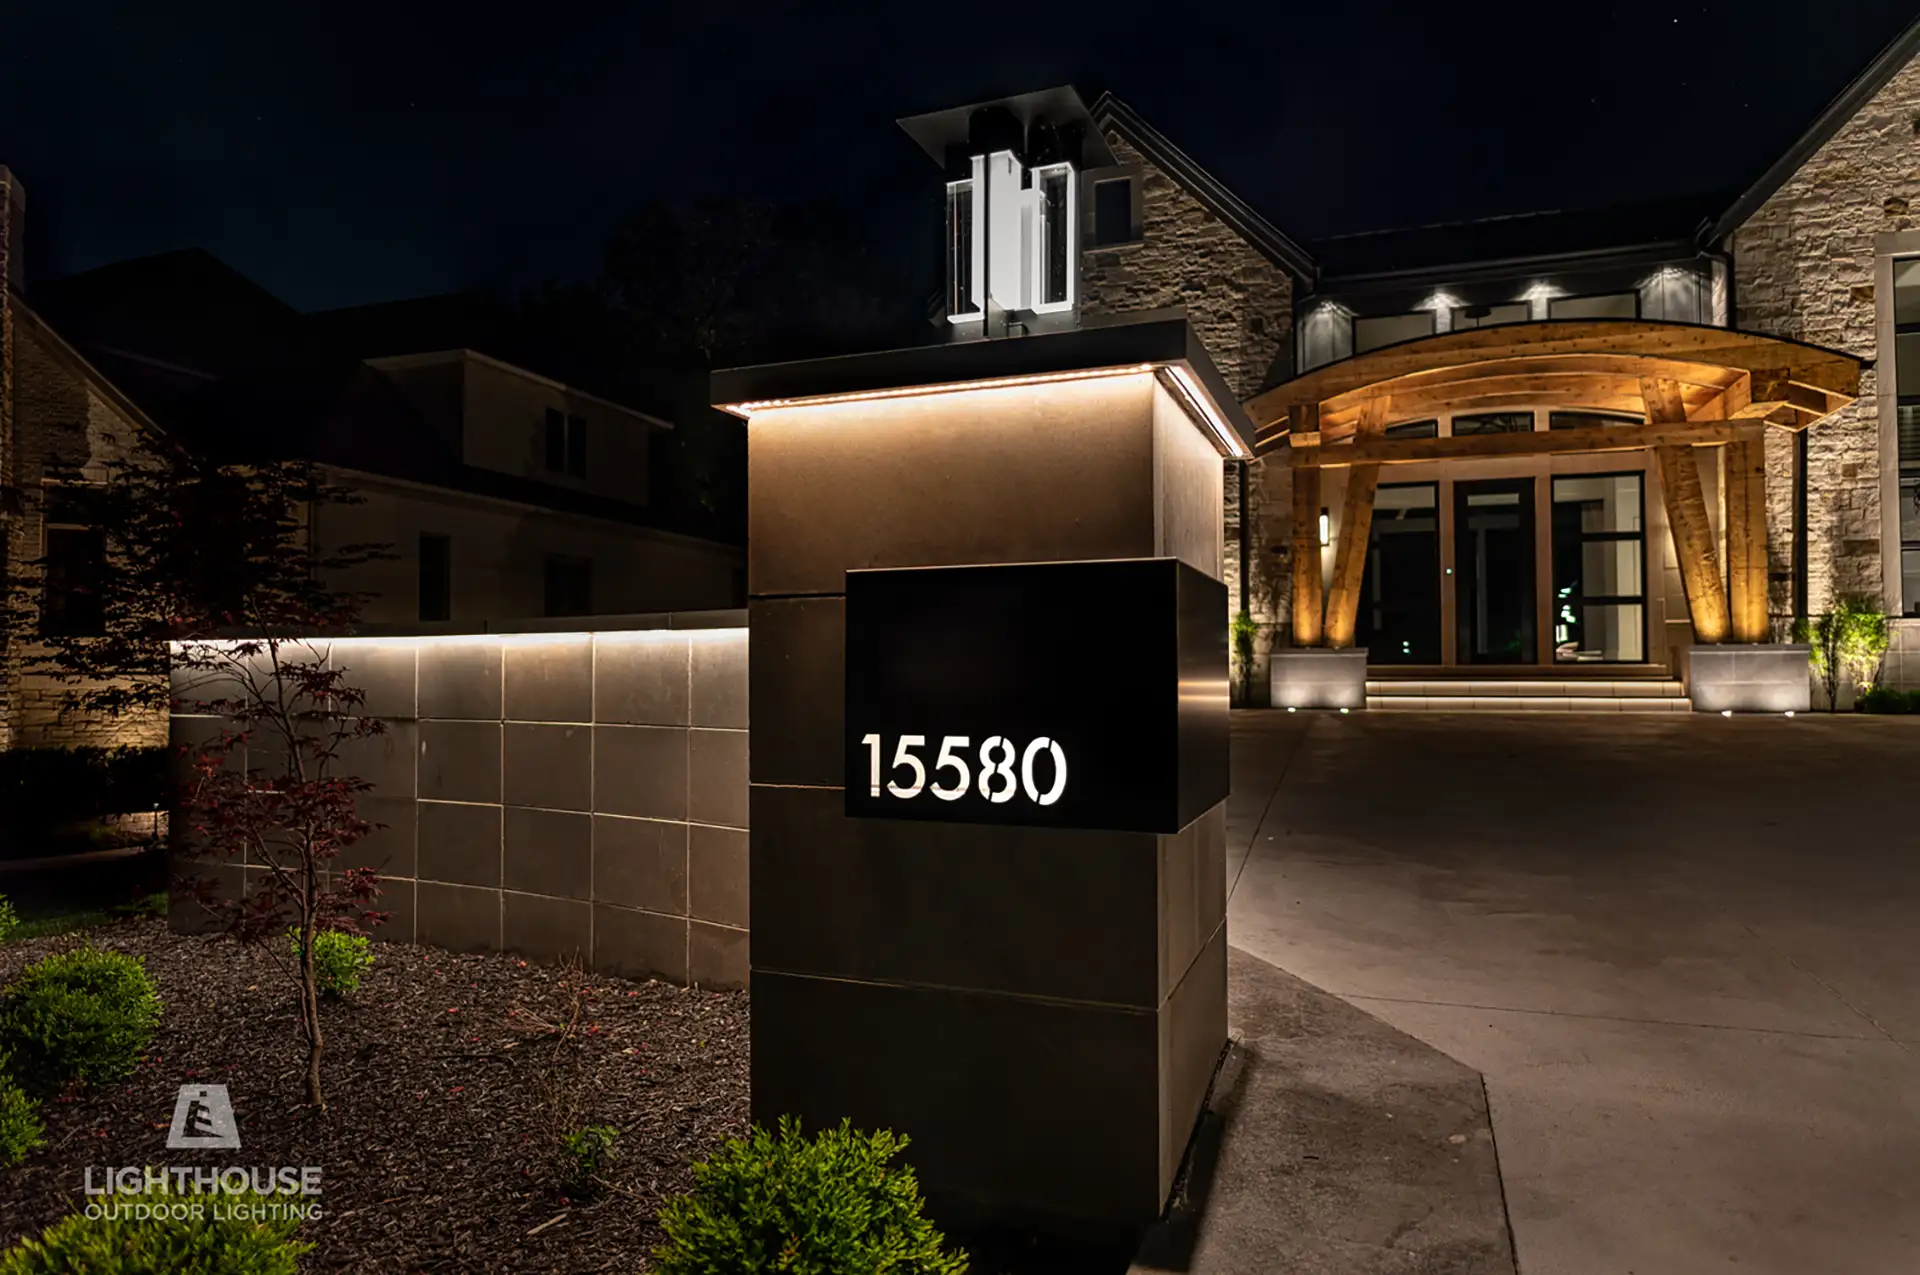 Koenig residence image 5 front entry address lighting Lighthouse Outdoor Lighting and Audio Vail CO